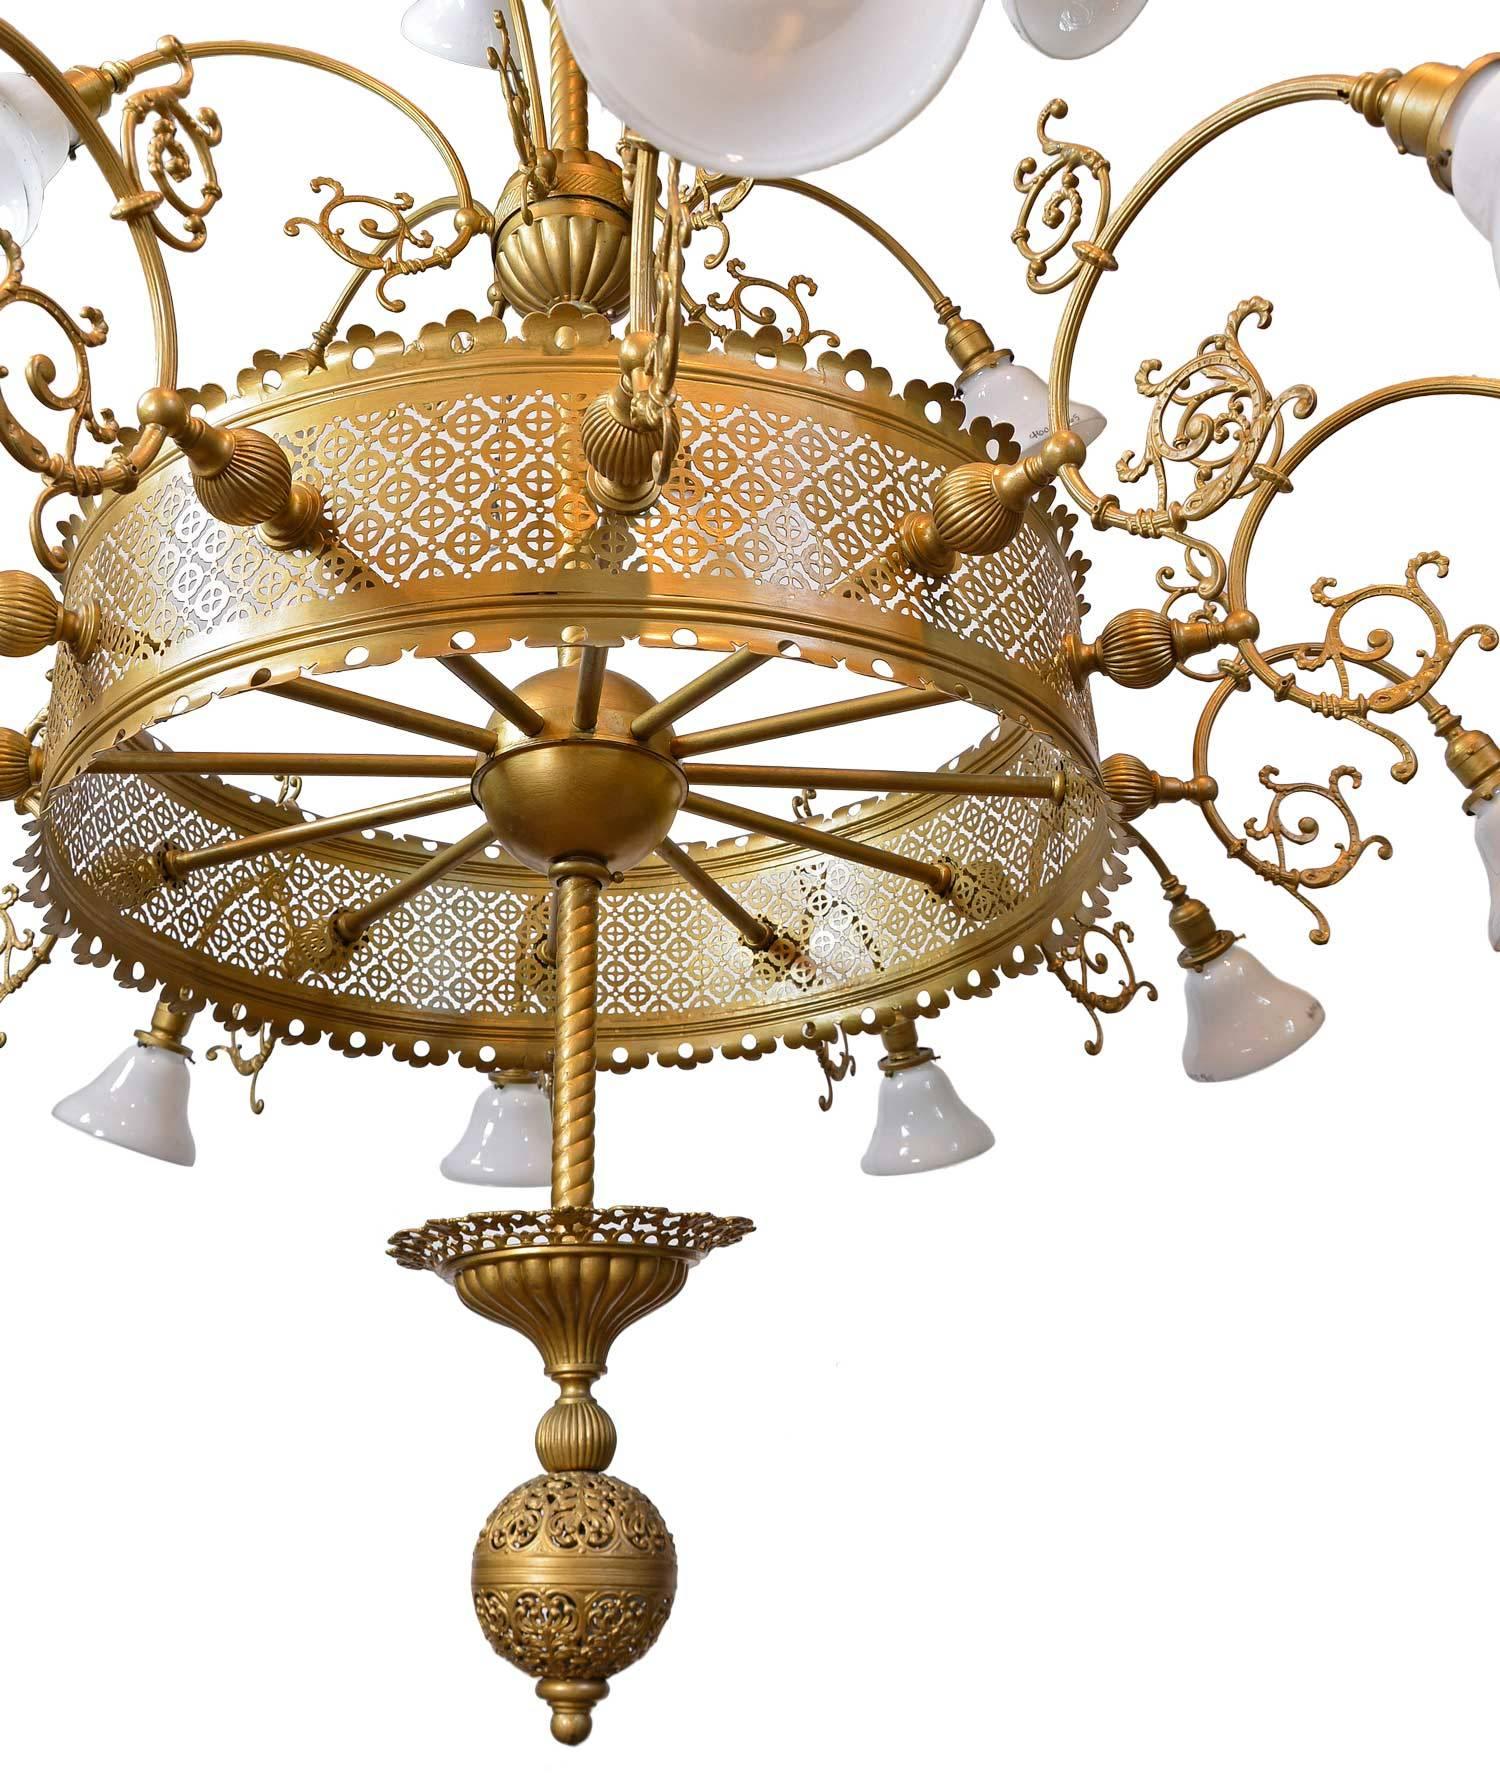 This grand, large-scale chandelier has twenty-one-arms and original milk glass shades. The fixture has Gothic details and filagree throughout, as well as an extra large canopy and decorative finial. Original painted finish over brass.

We find that